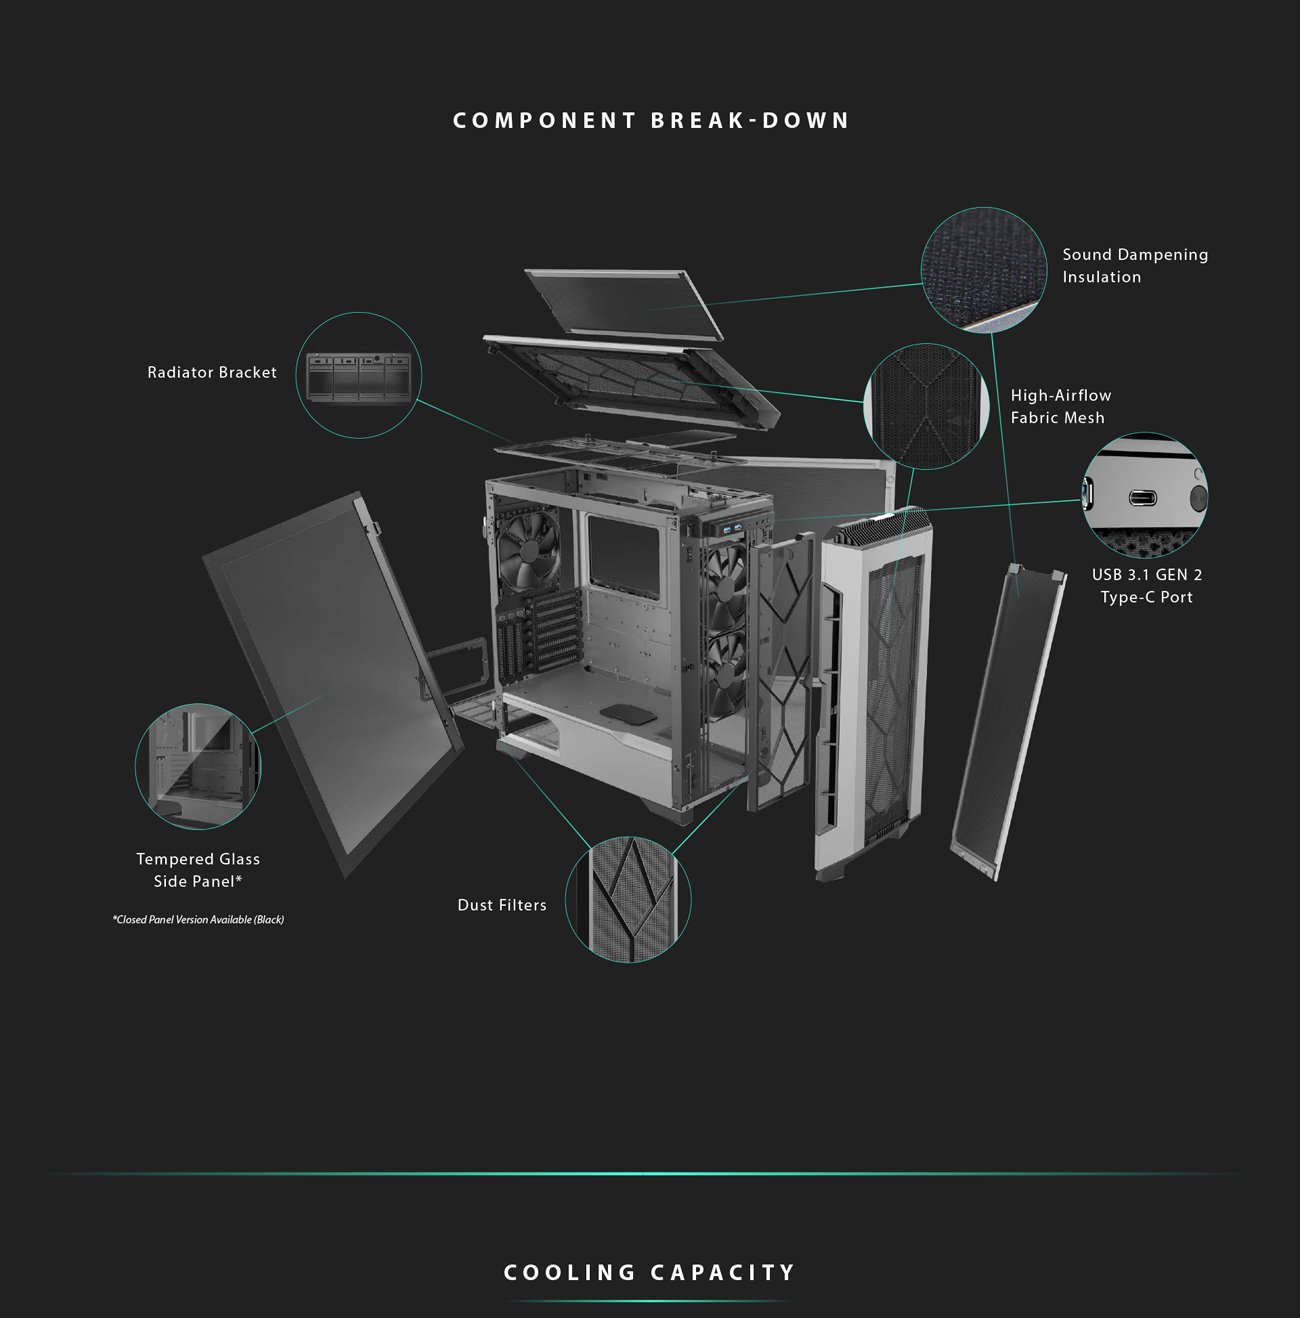 Component Breakdown Image Showing All the Pieces that Make This Case